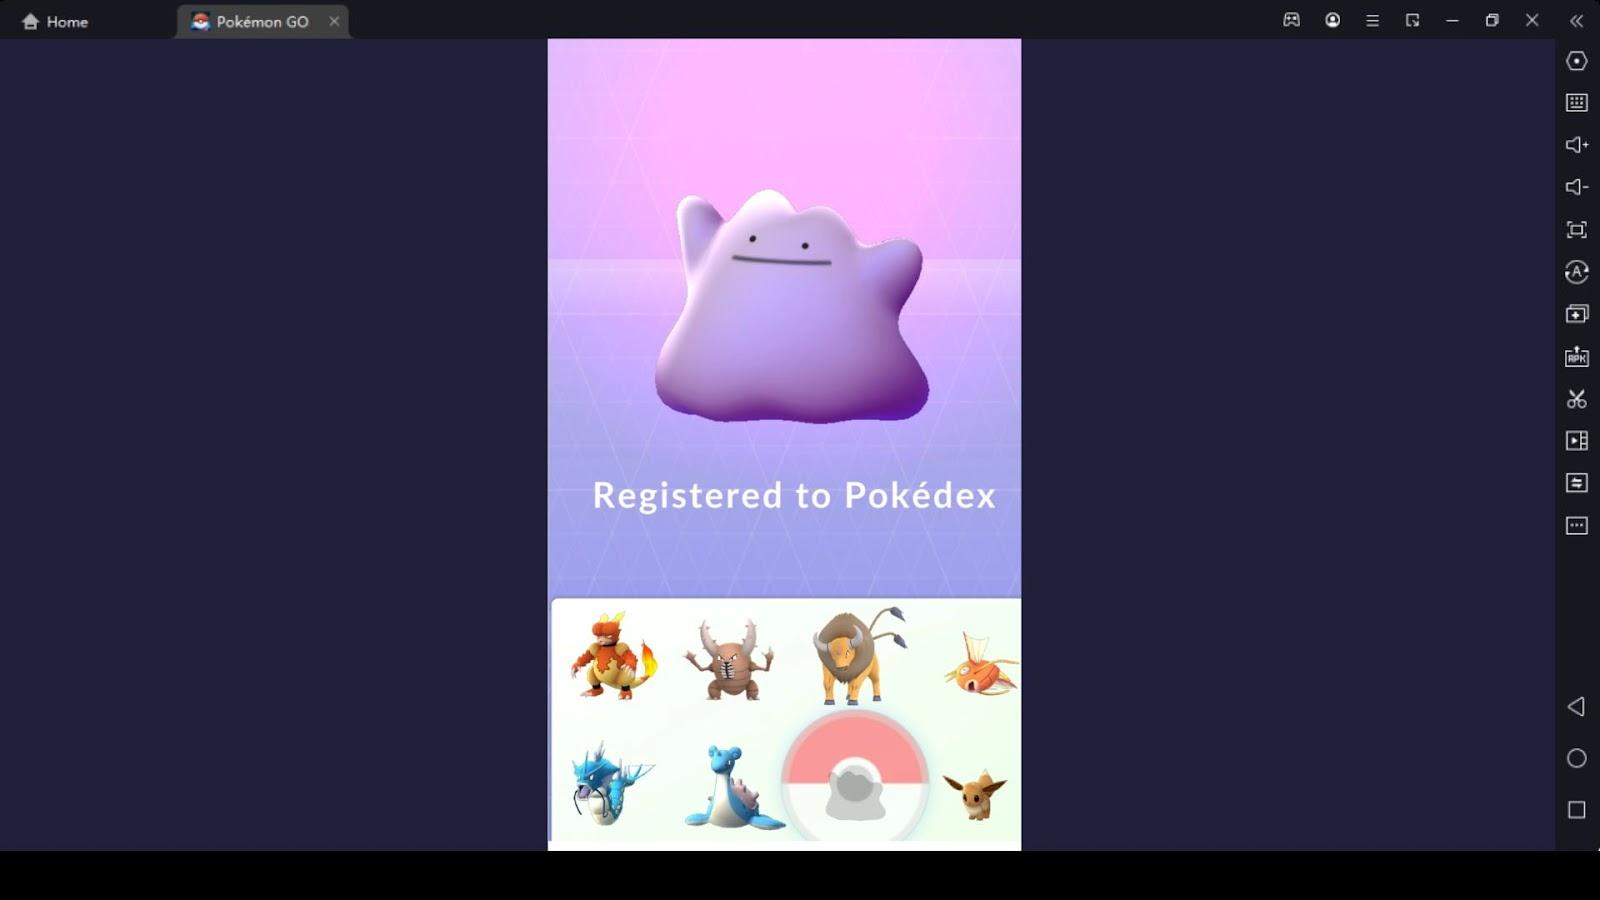 What does this quest mean, do you have to catch a Pokémon and hope it  transforms into ditto or catch the Pokémon that turn into ditto but it  doesn't need to be